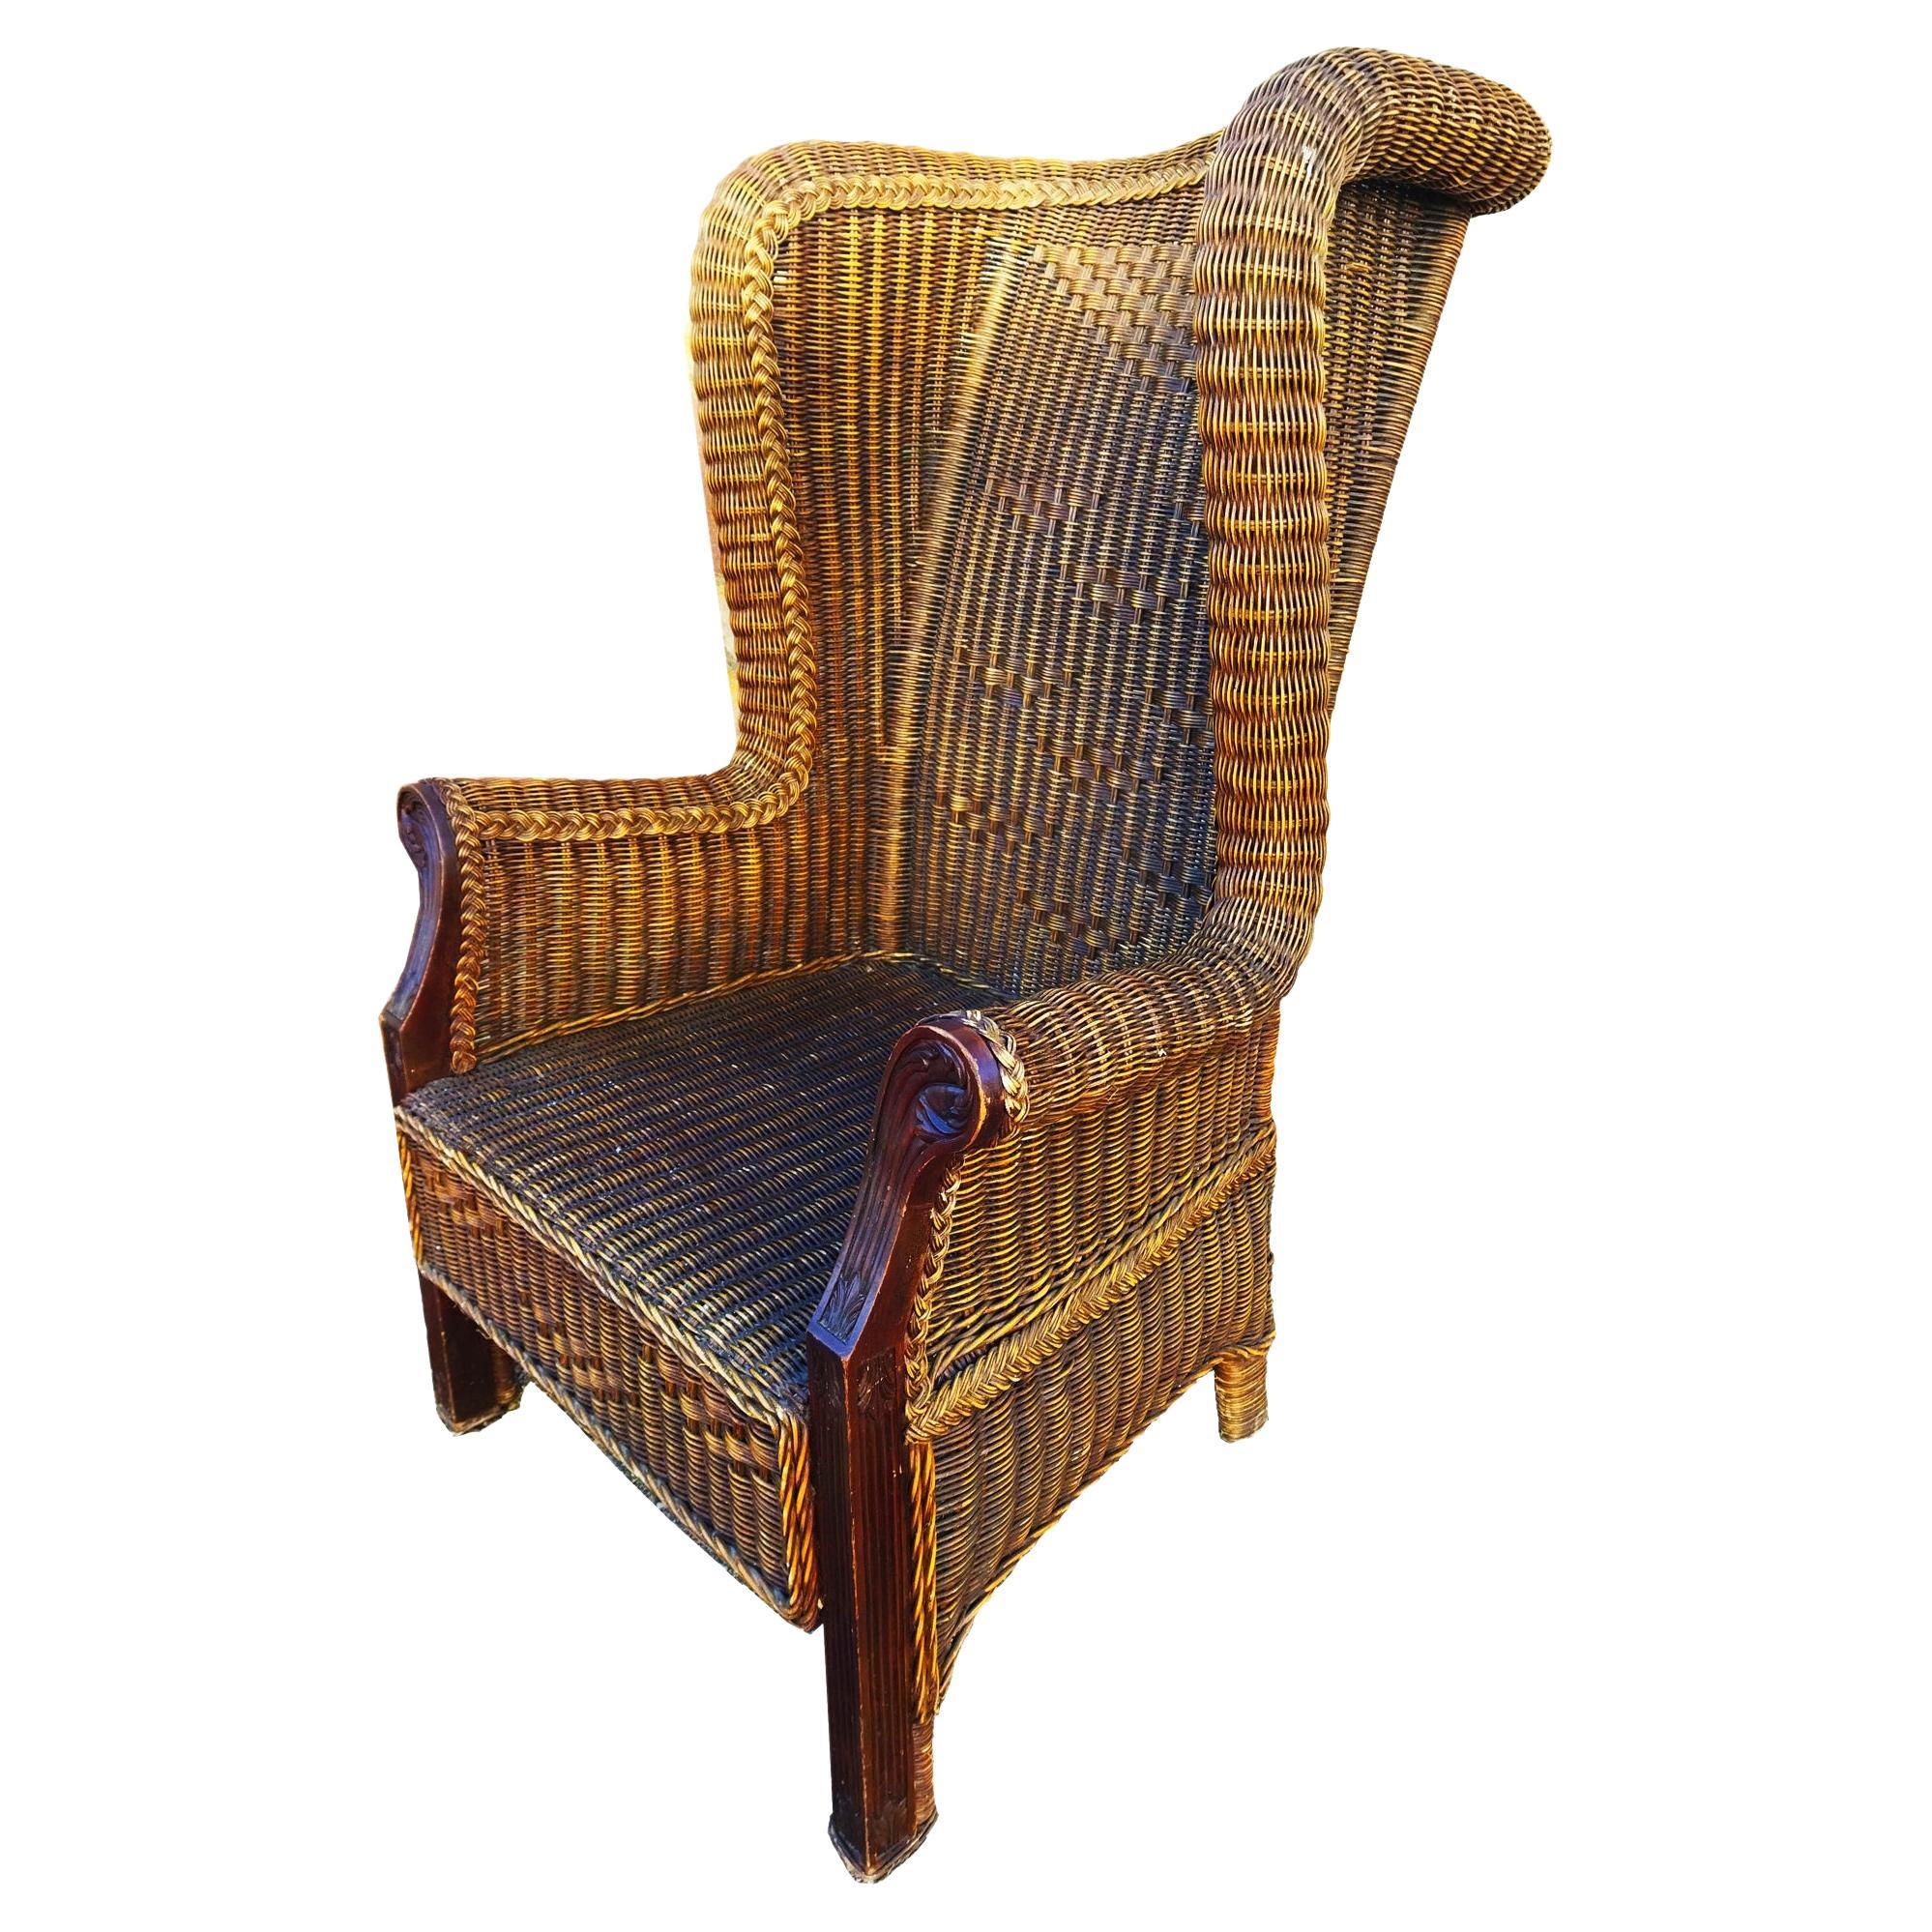  Spectacular VictorianStyle  Wicker Throne, Very Big  High Backrest  Wide Seat For Sale 5